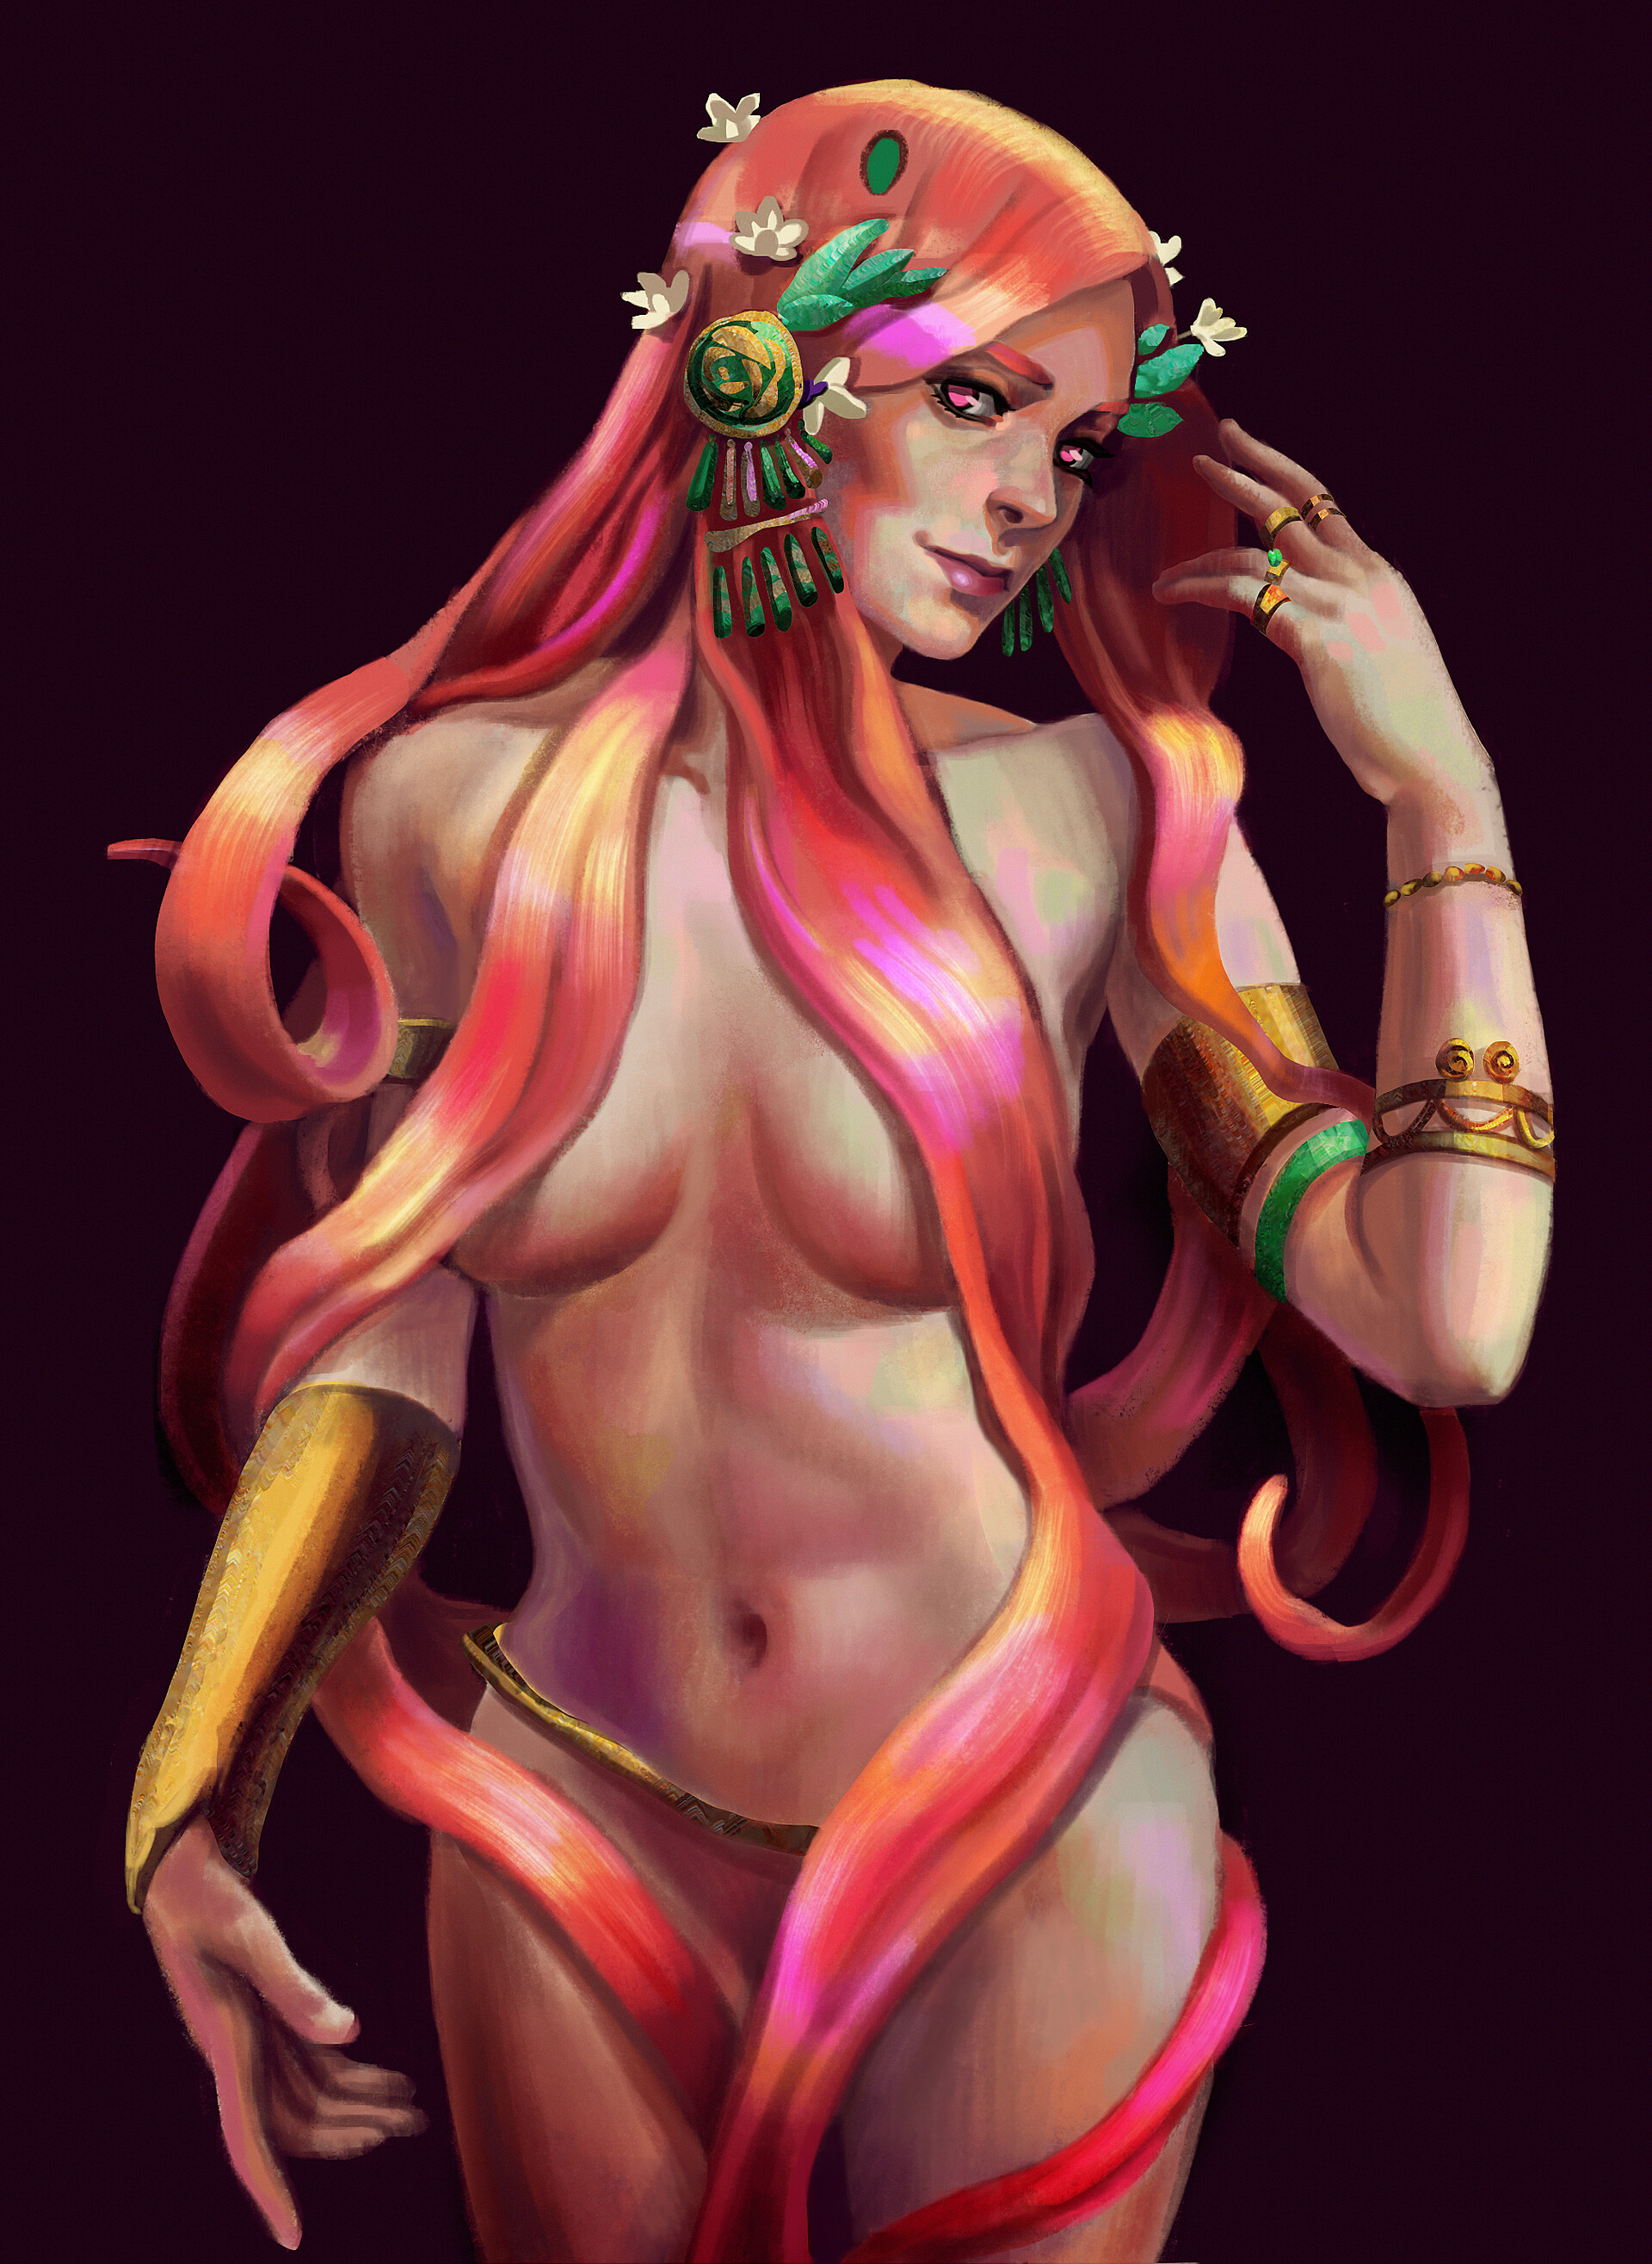 Aphrodite from Hades.